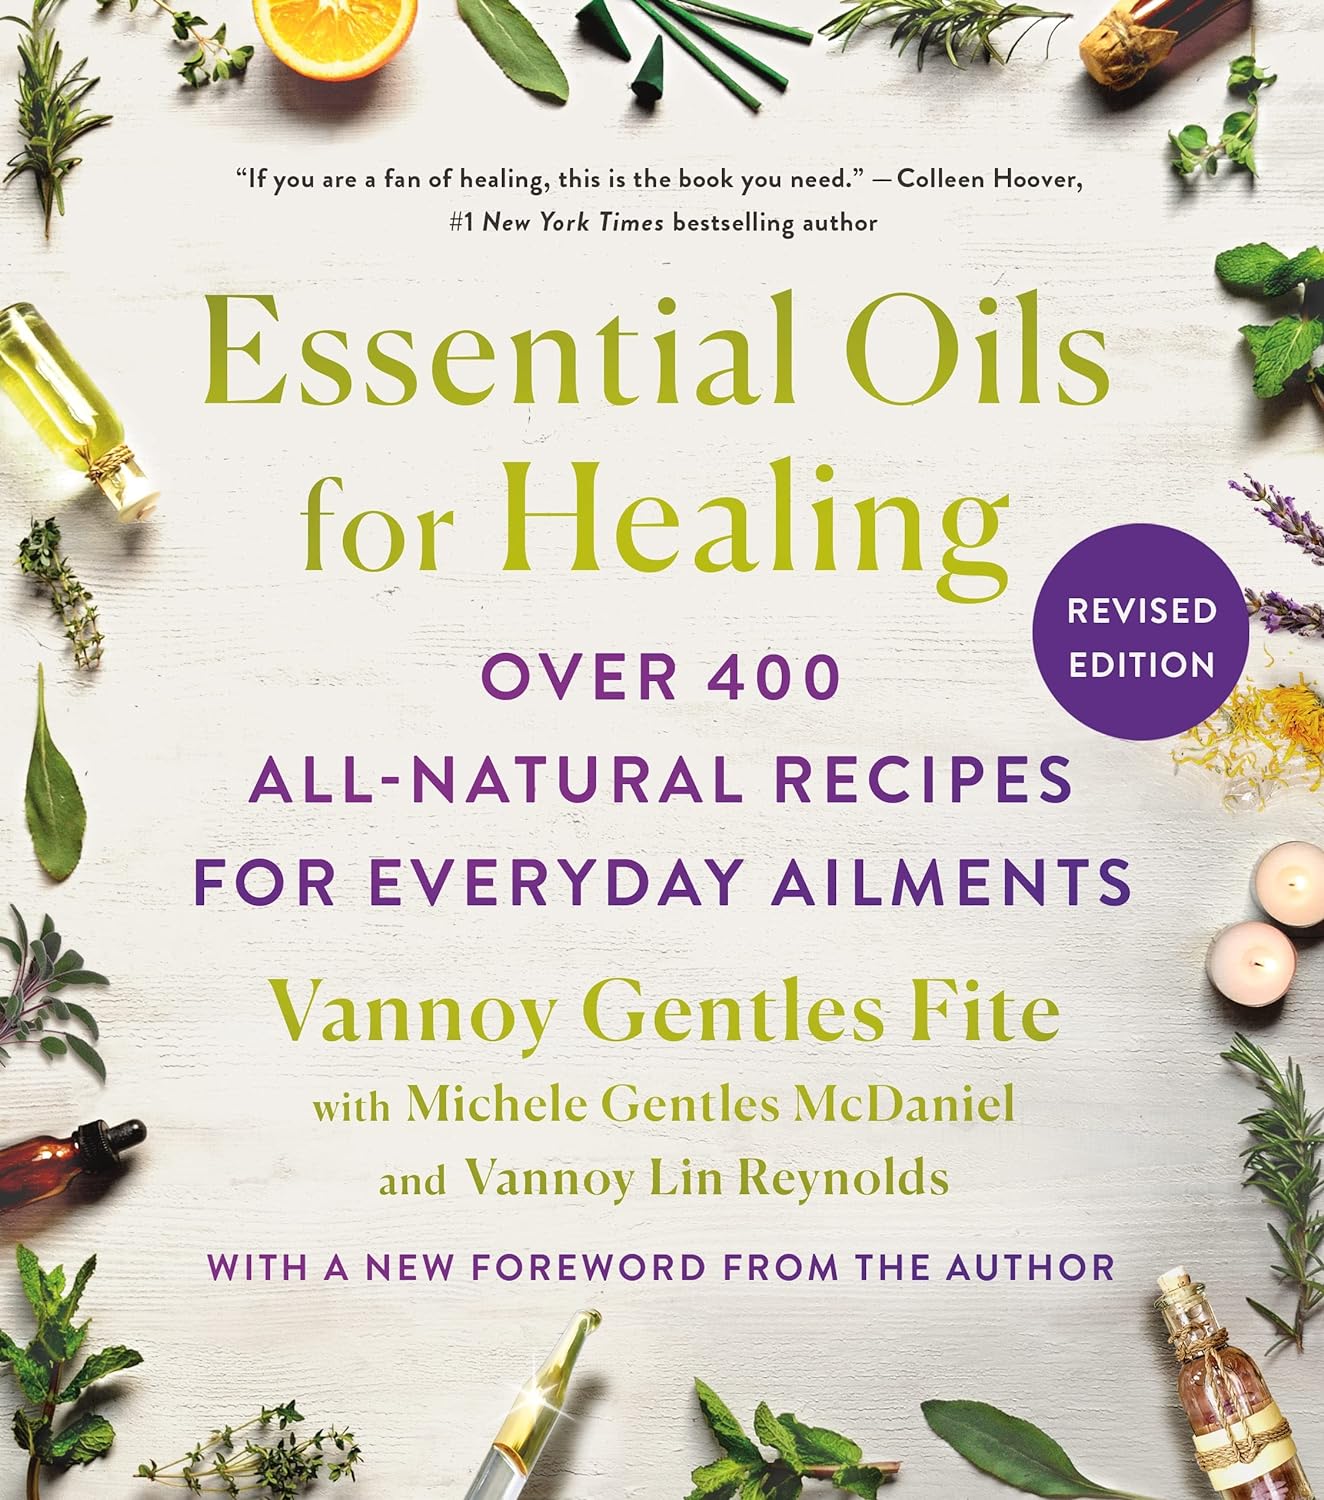 Essential Oils For Healing : Revised Edition, Over 400 All - Natural Recipes For Everyday Ailments